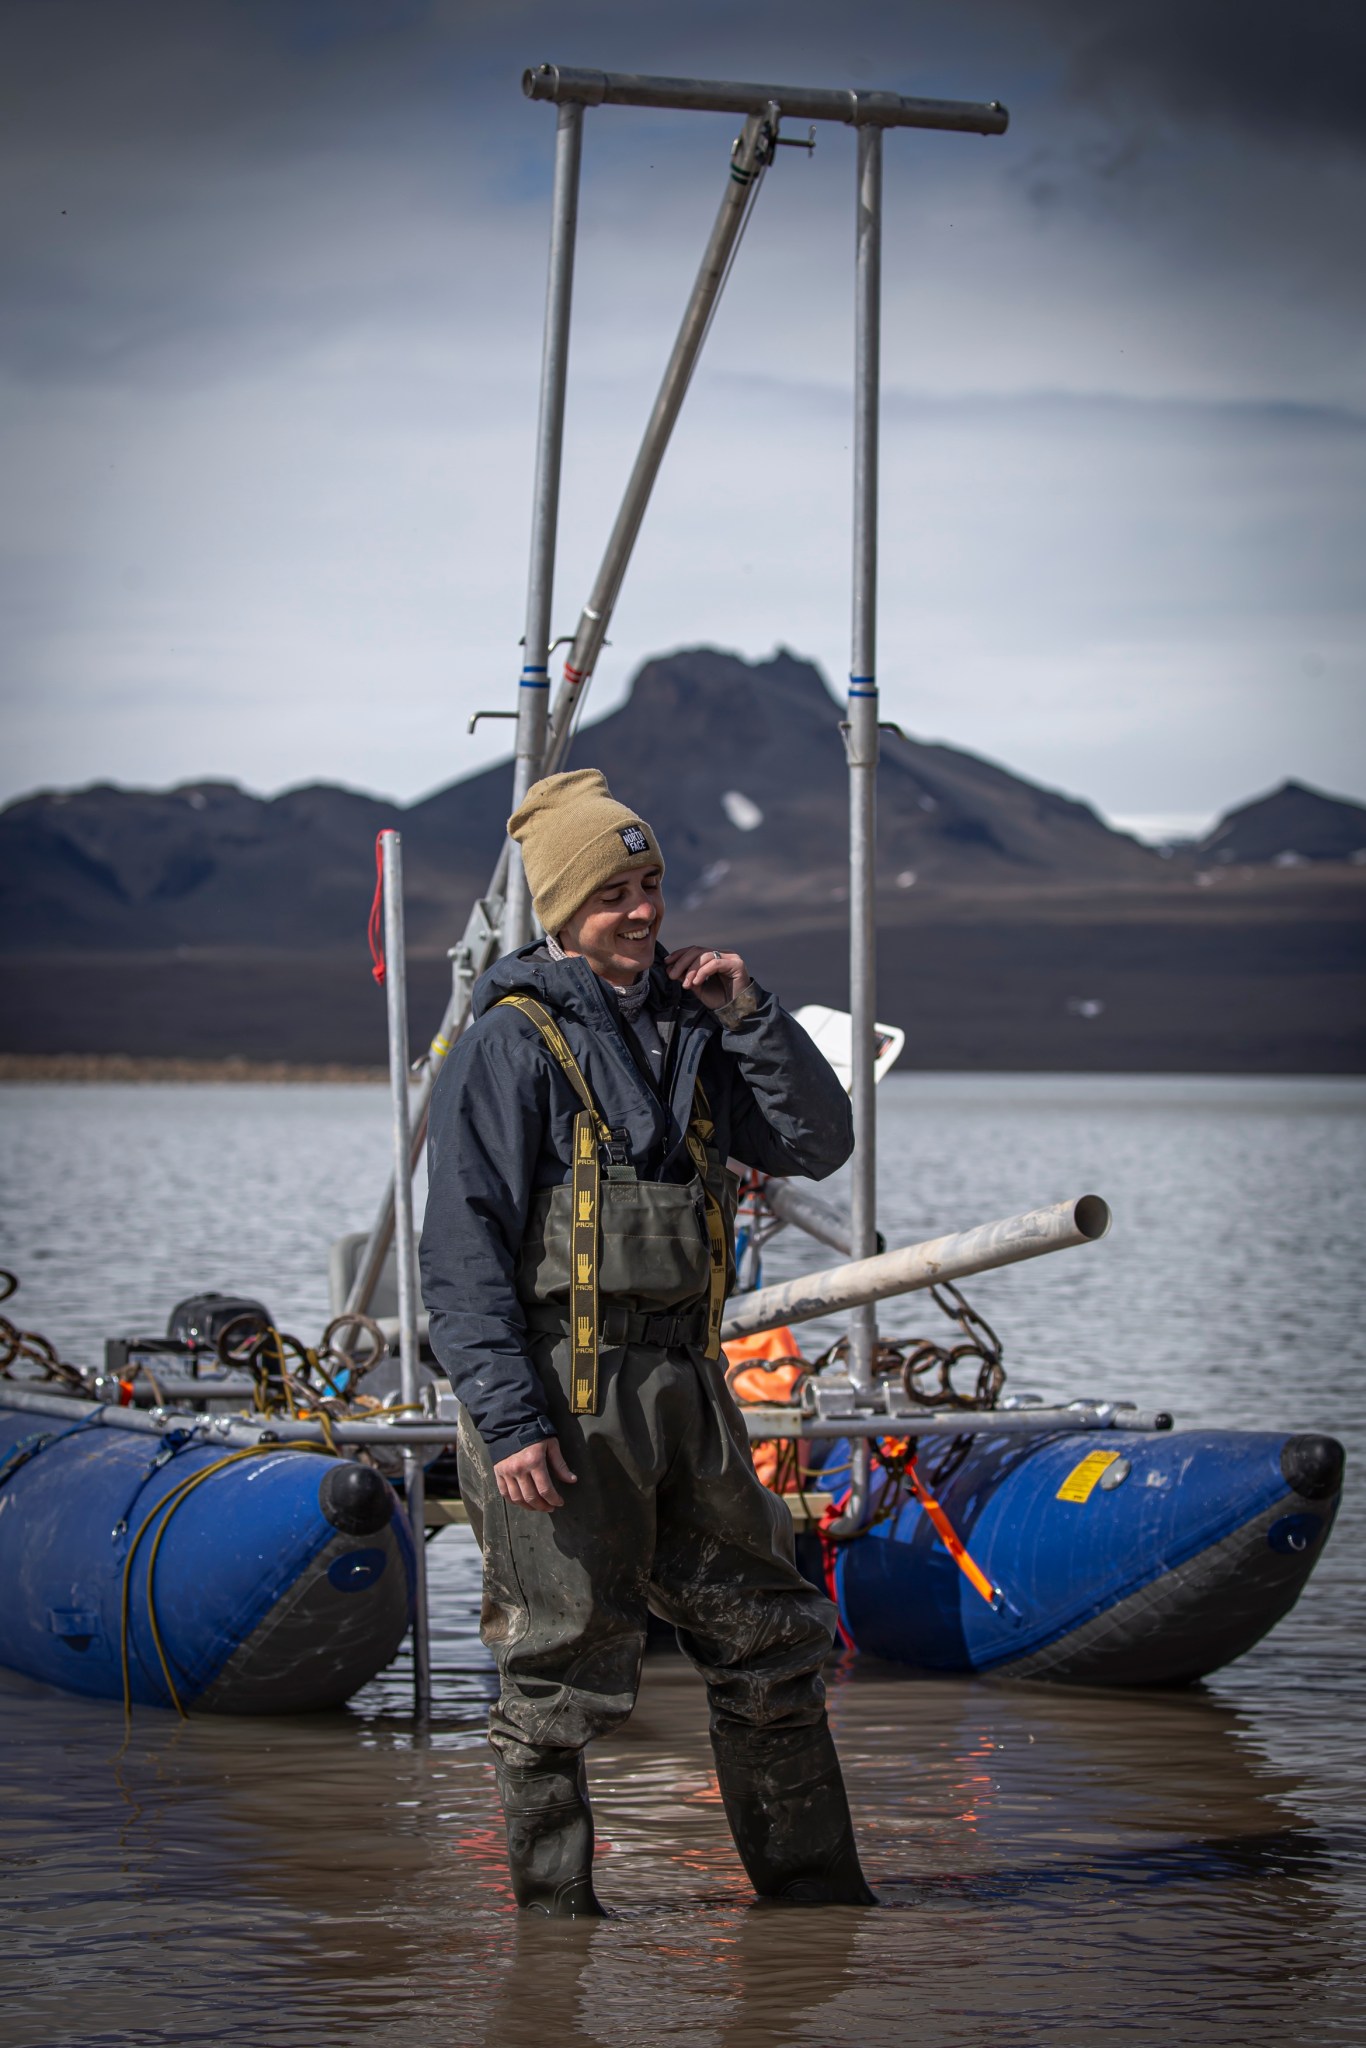 Dr. Michael Thorpe laughs and adjusts his coat collar as he stands in ankle-deep water. He wears a gold stocking cap and navy blue winter coat underneath dark green waders, or waterproof overalls. He stands in front of a blue pontoon boat covered with straps, loops, and equipment. Dark brown, rocky mountains are visible in the background and the sky is a heavy, cloudy gray.